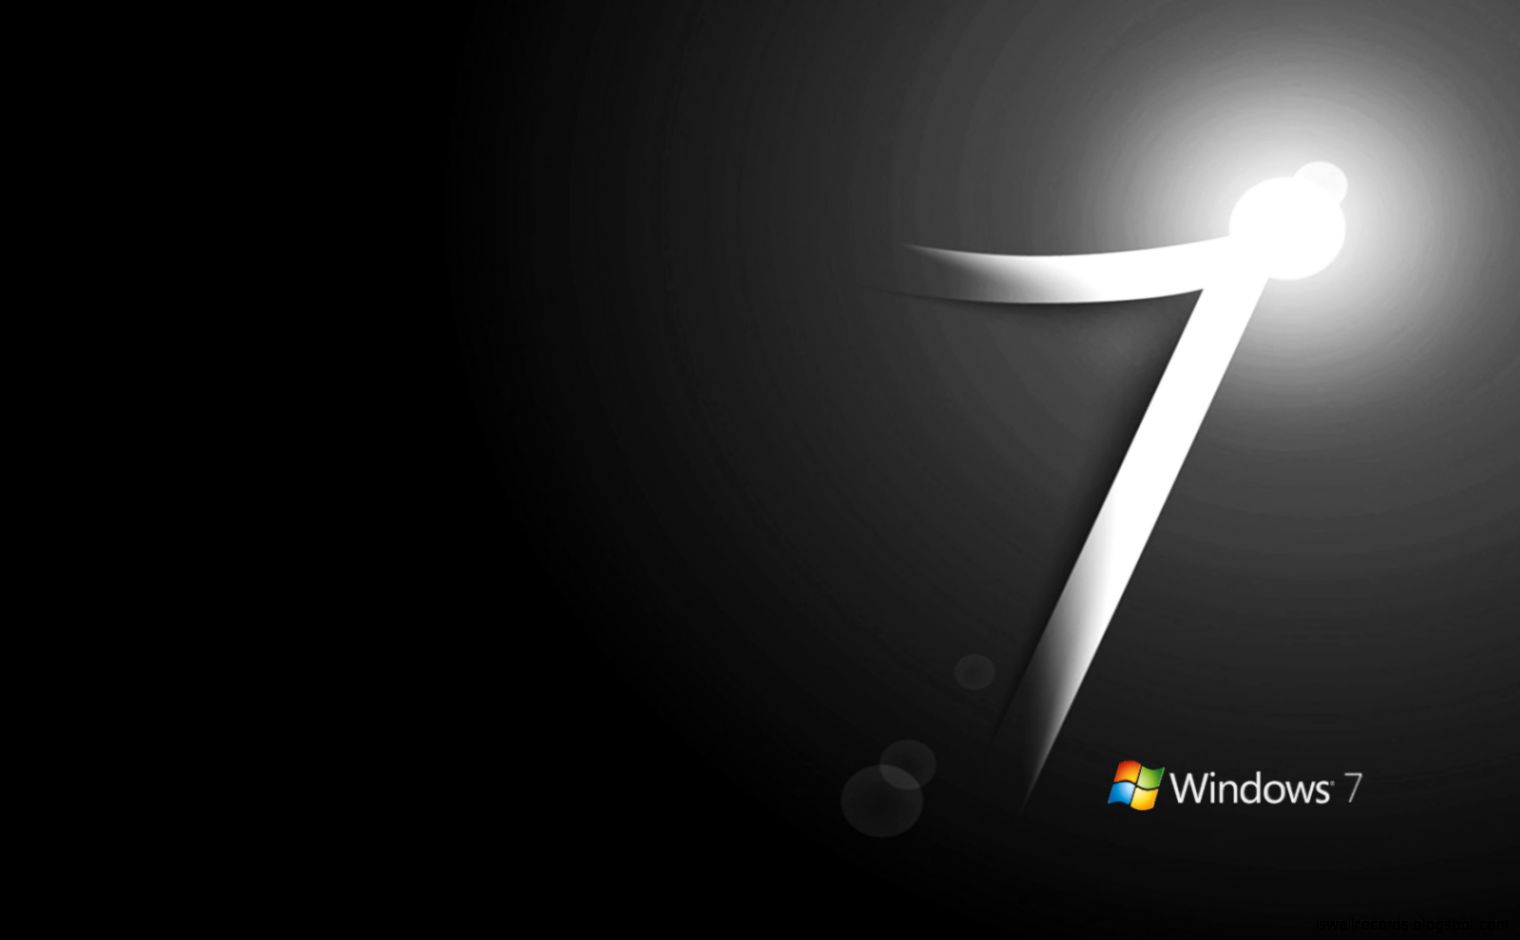 Free Download High Resolution Wallpapers Windows 7 | Wallpapers ...